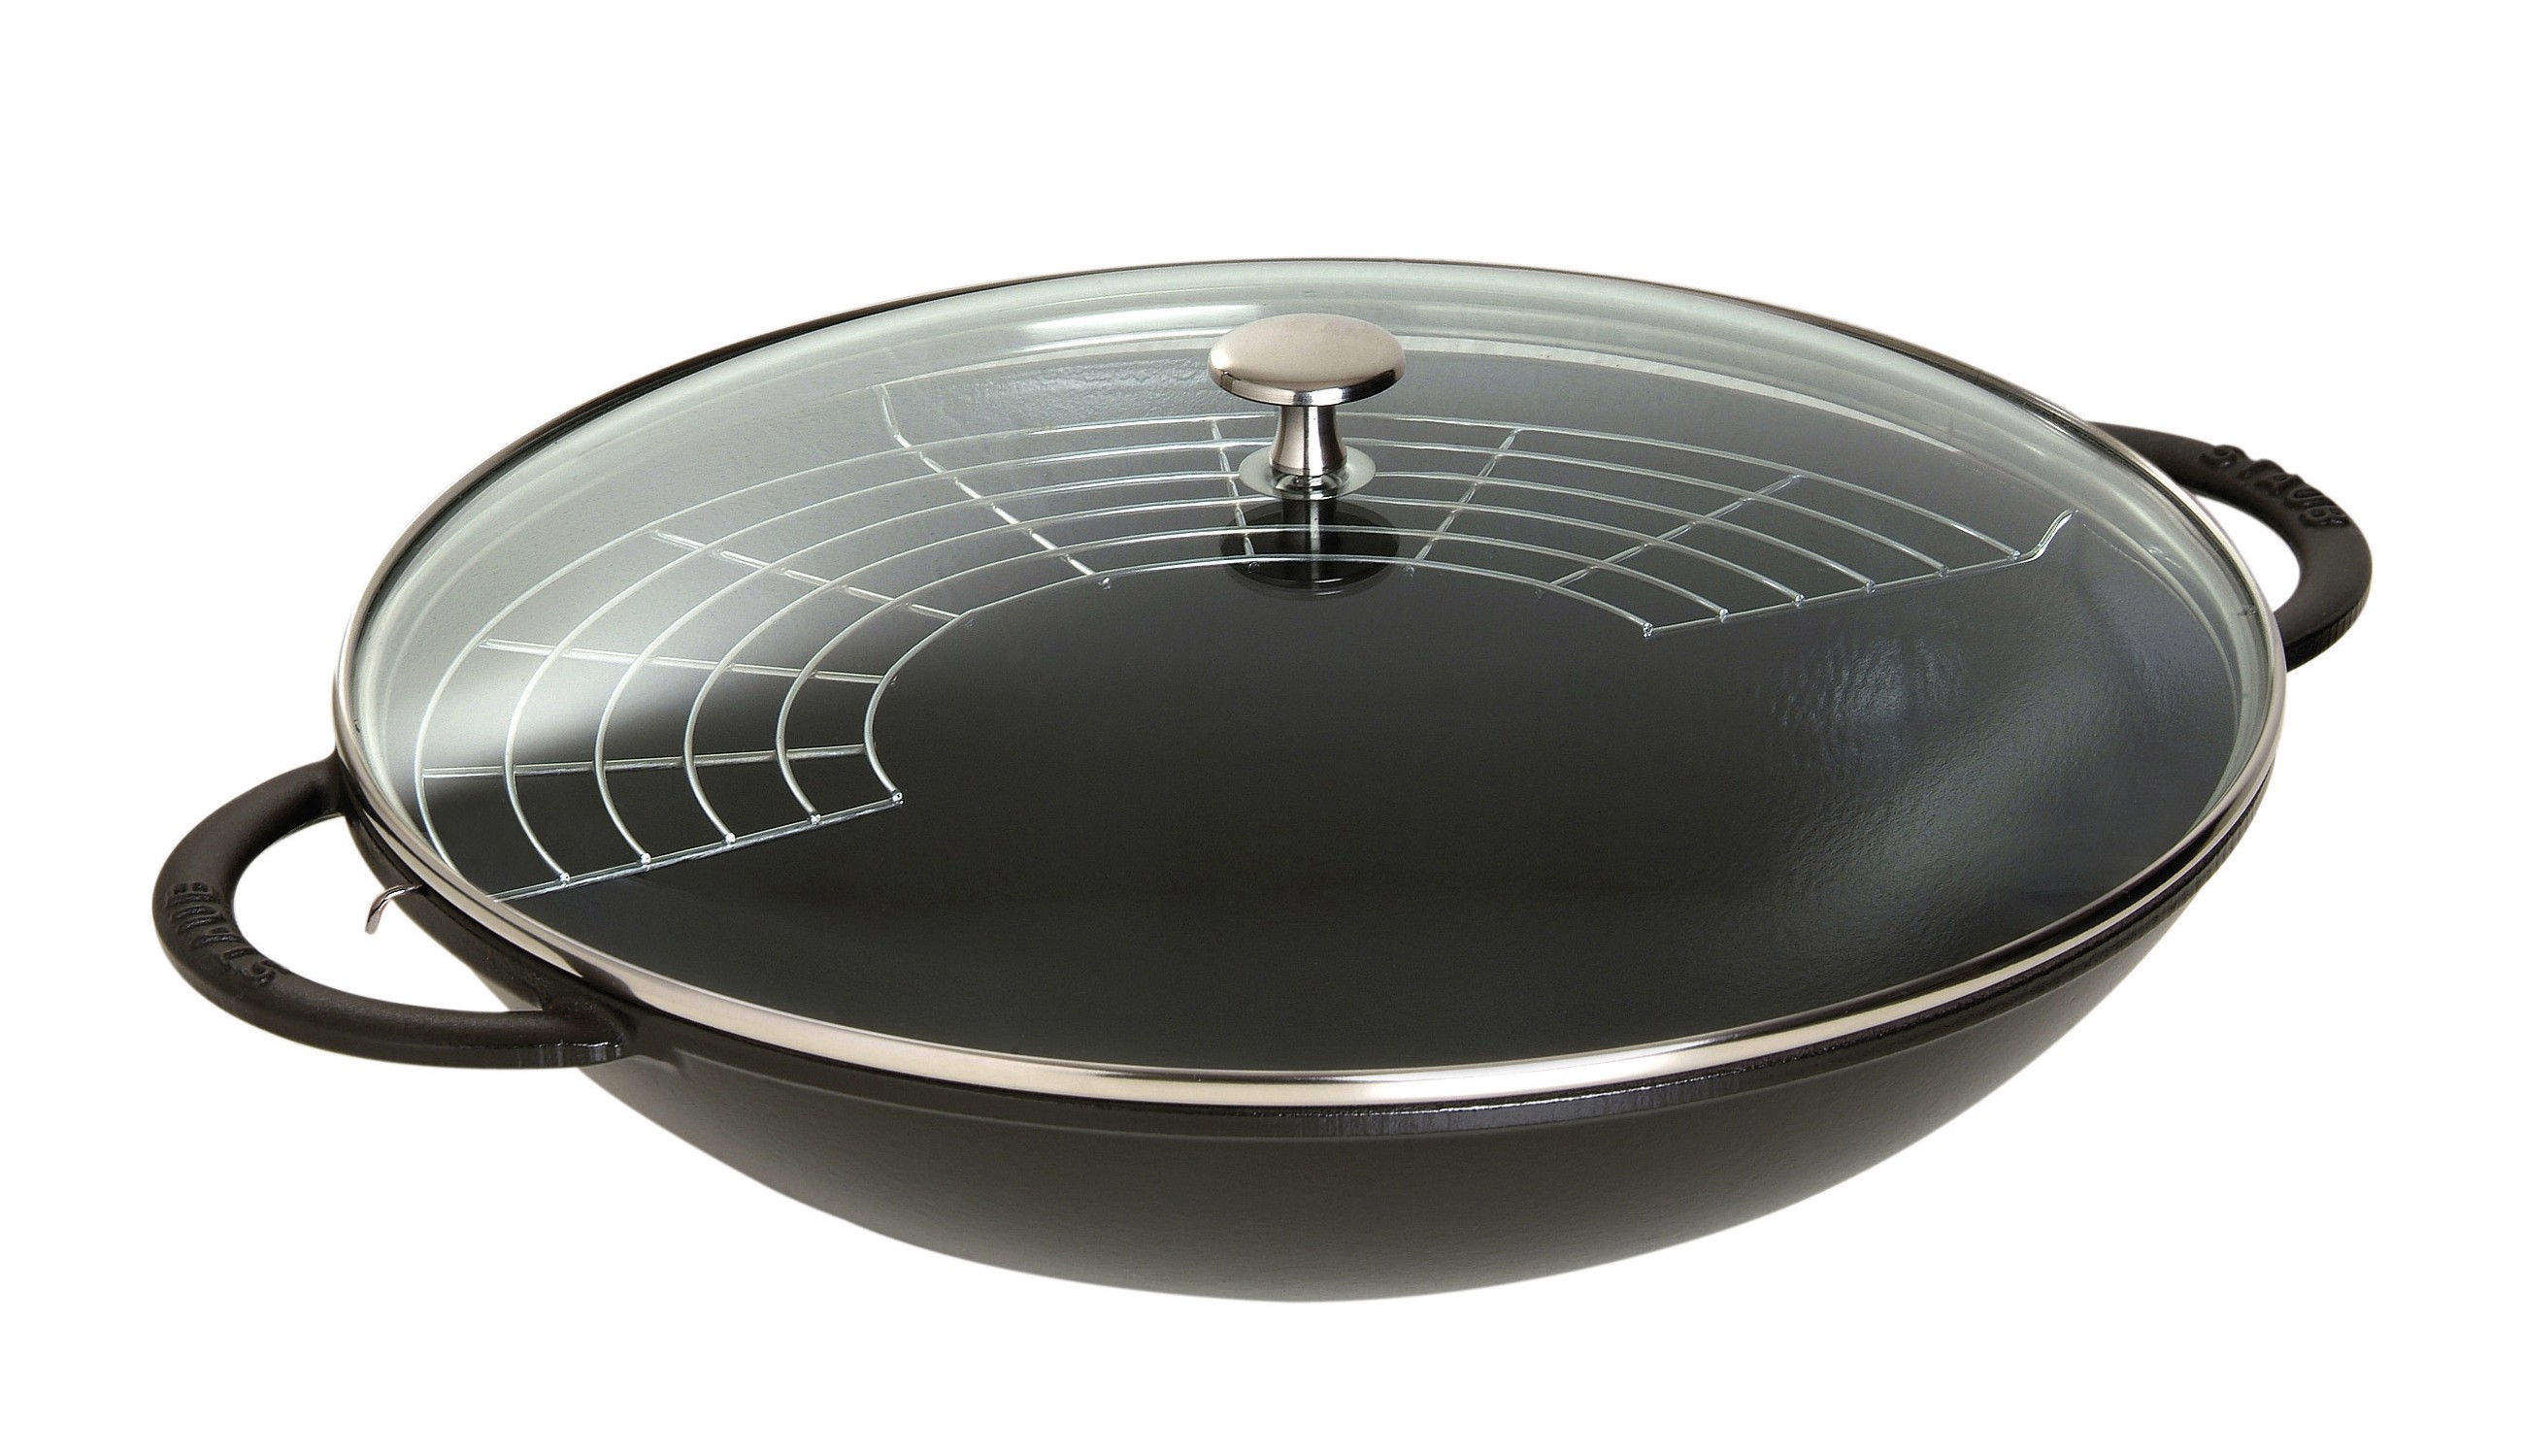 Online-Shop - Buy Wok with glass lid